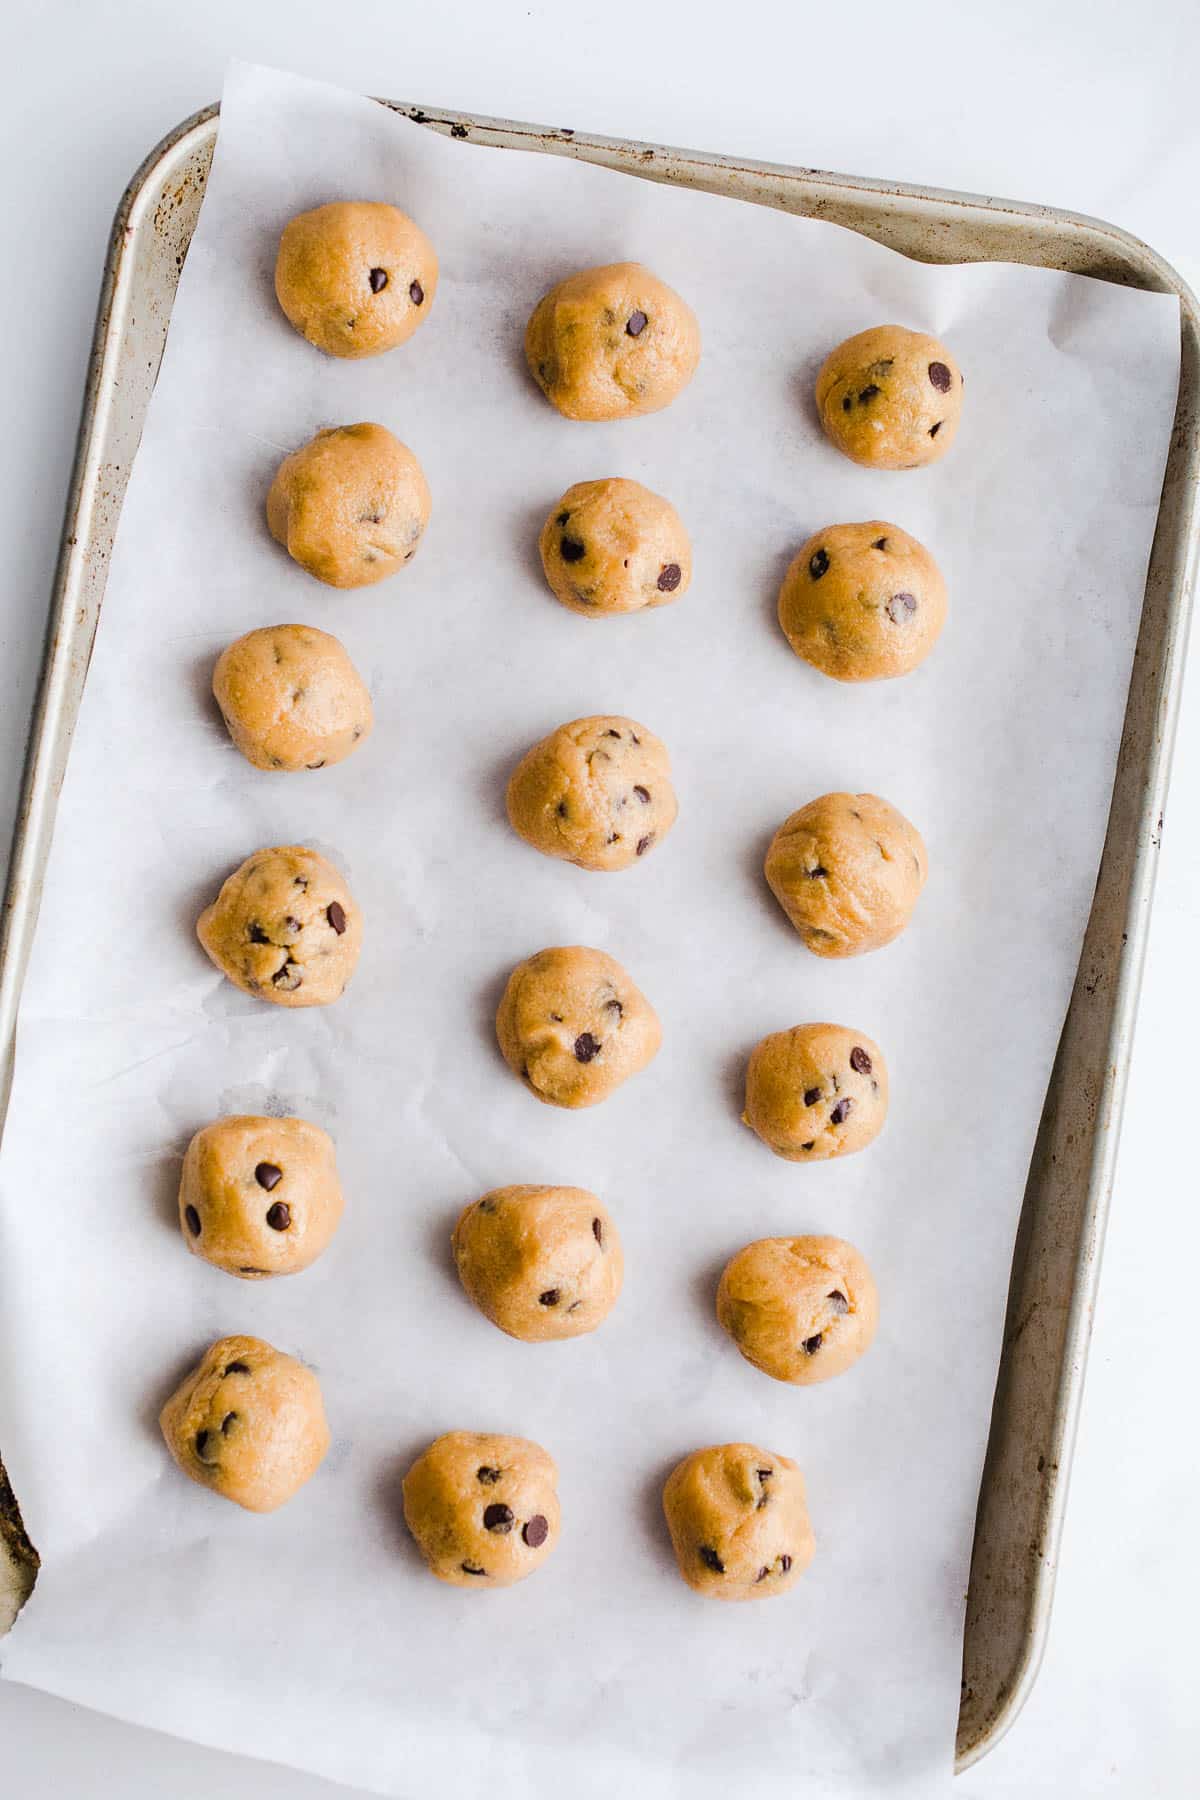 Dough balls with chocolate chips on a baking sheet.